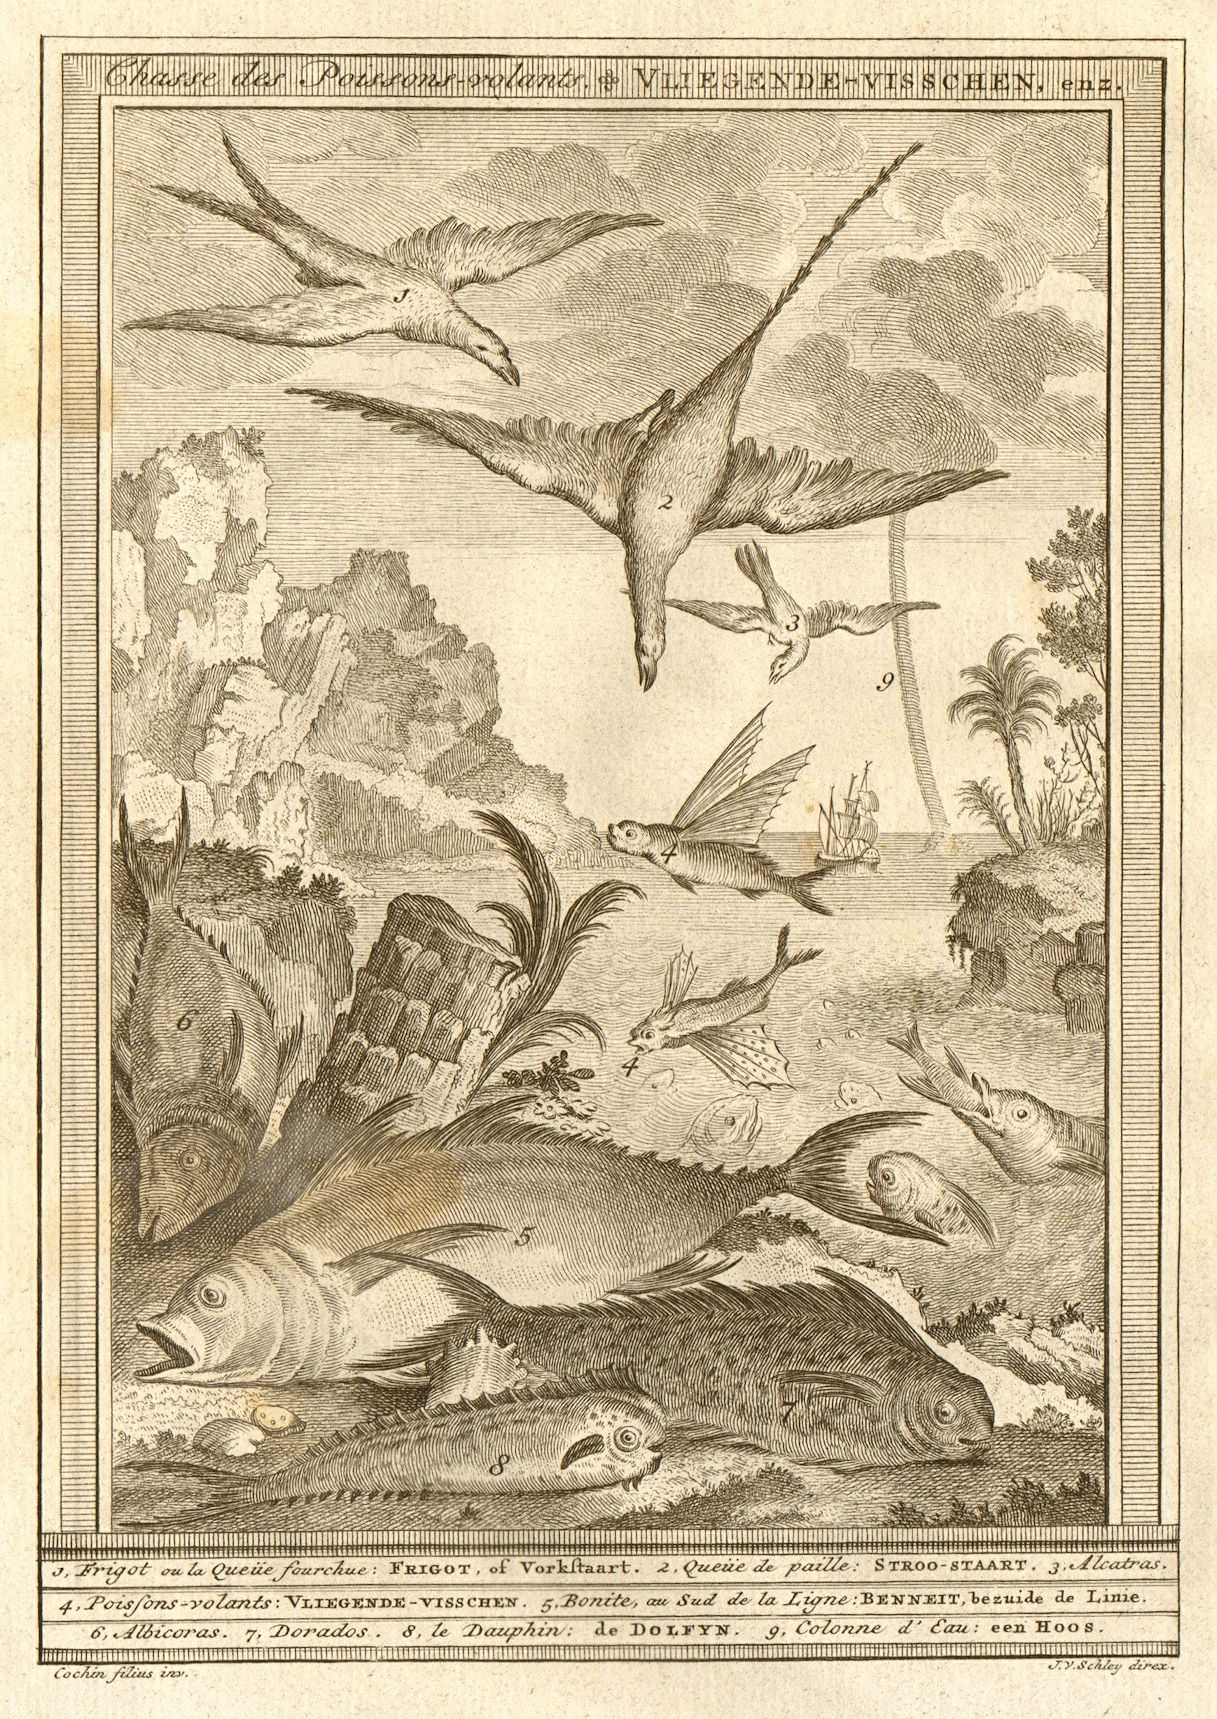 Associate Product 'Chasse de poissons volans'. Birds hunting flying fish South Africa. SCHLEY 1747